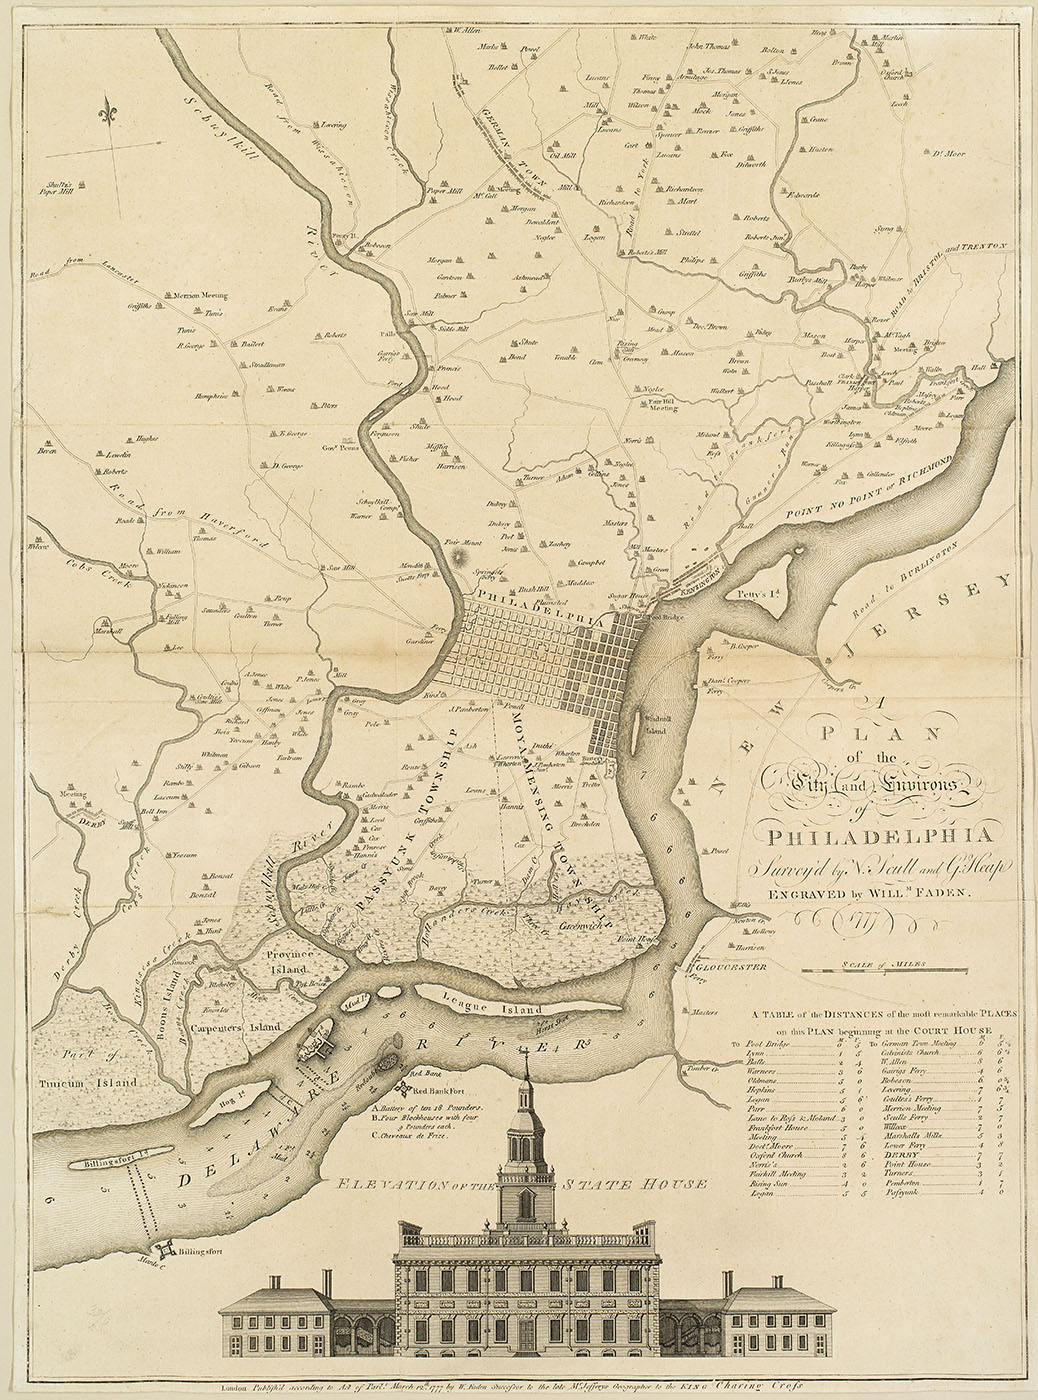 Plan of the City and Environs of Philadelphia, surveyed by N. Scull and G. Heap, engraved by William Faden, London, England, 1777. (The Gilder Lehrman Institute, GLC02118)